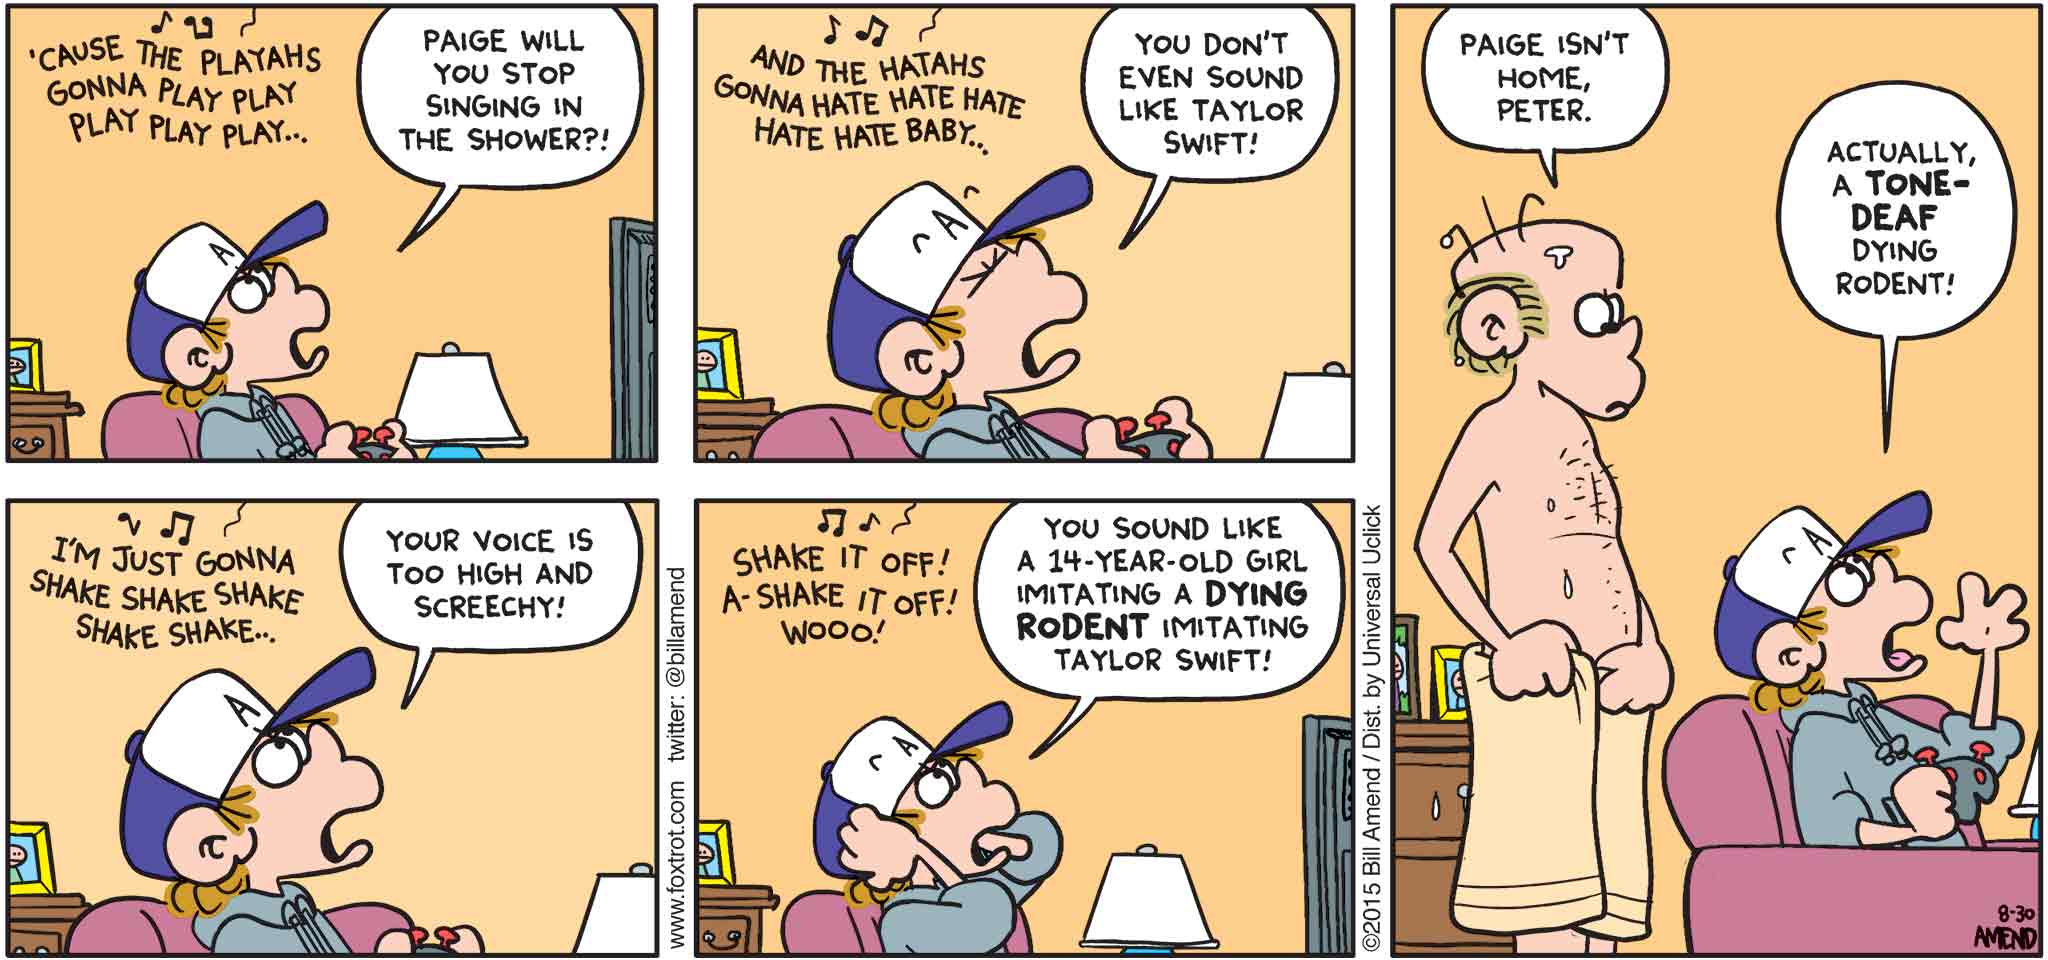 FoxTrot by Bill Amend - "Shakin’ It Way Off" published August 30, 2015 - Roger: 'Cause the playahs gonna play play play play play... Peter: Paige will you stop singing in the shower?! Roger: And the hatahs gonna hate hate hate hate hate baby... Peter: You don't even sound like Taylor Swift! Roger: I'm just gonna shake shake shake shake shake... Peter: Your voice is too high and screechy! Roger: Shake it off! A-shake it off! Woo! Peter: You sound like a 14-year-old girl imitating a DYING RODENT imitating Taylor Swift! Roger: Paige isn't home, Peter. Peter: Actually, a tone-deaf dying rodent!